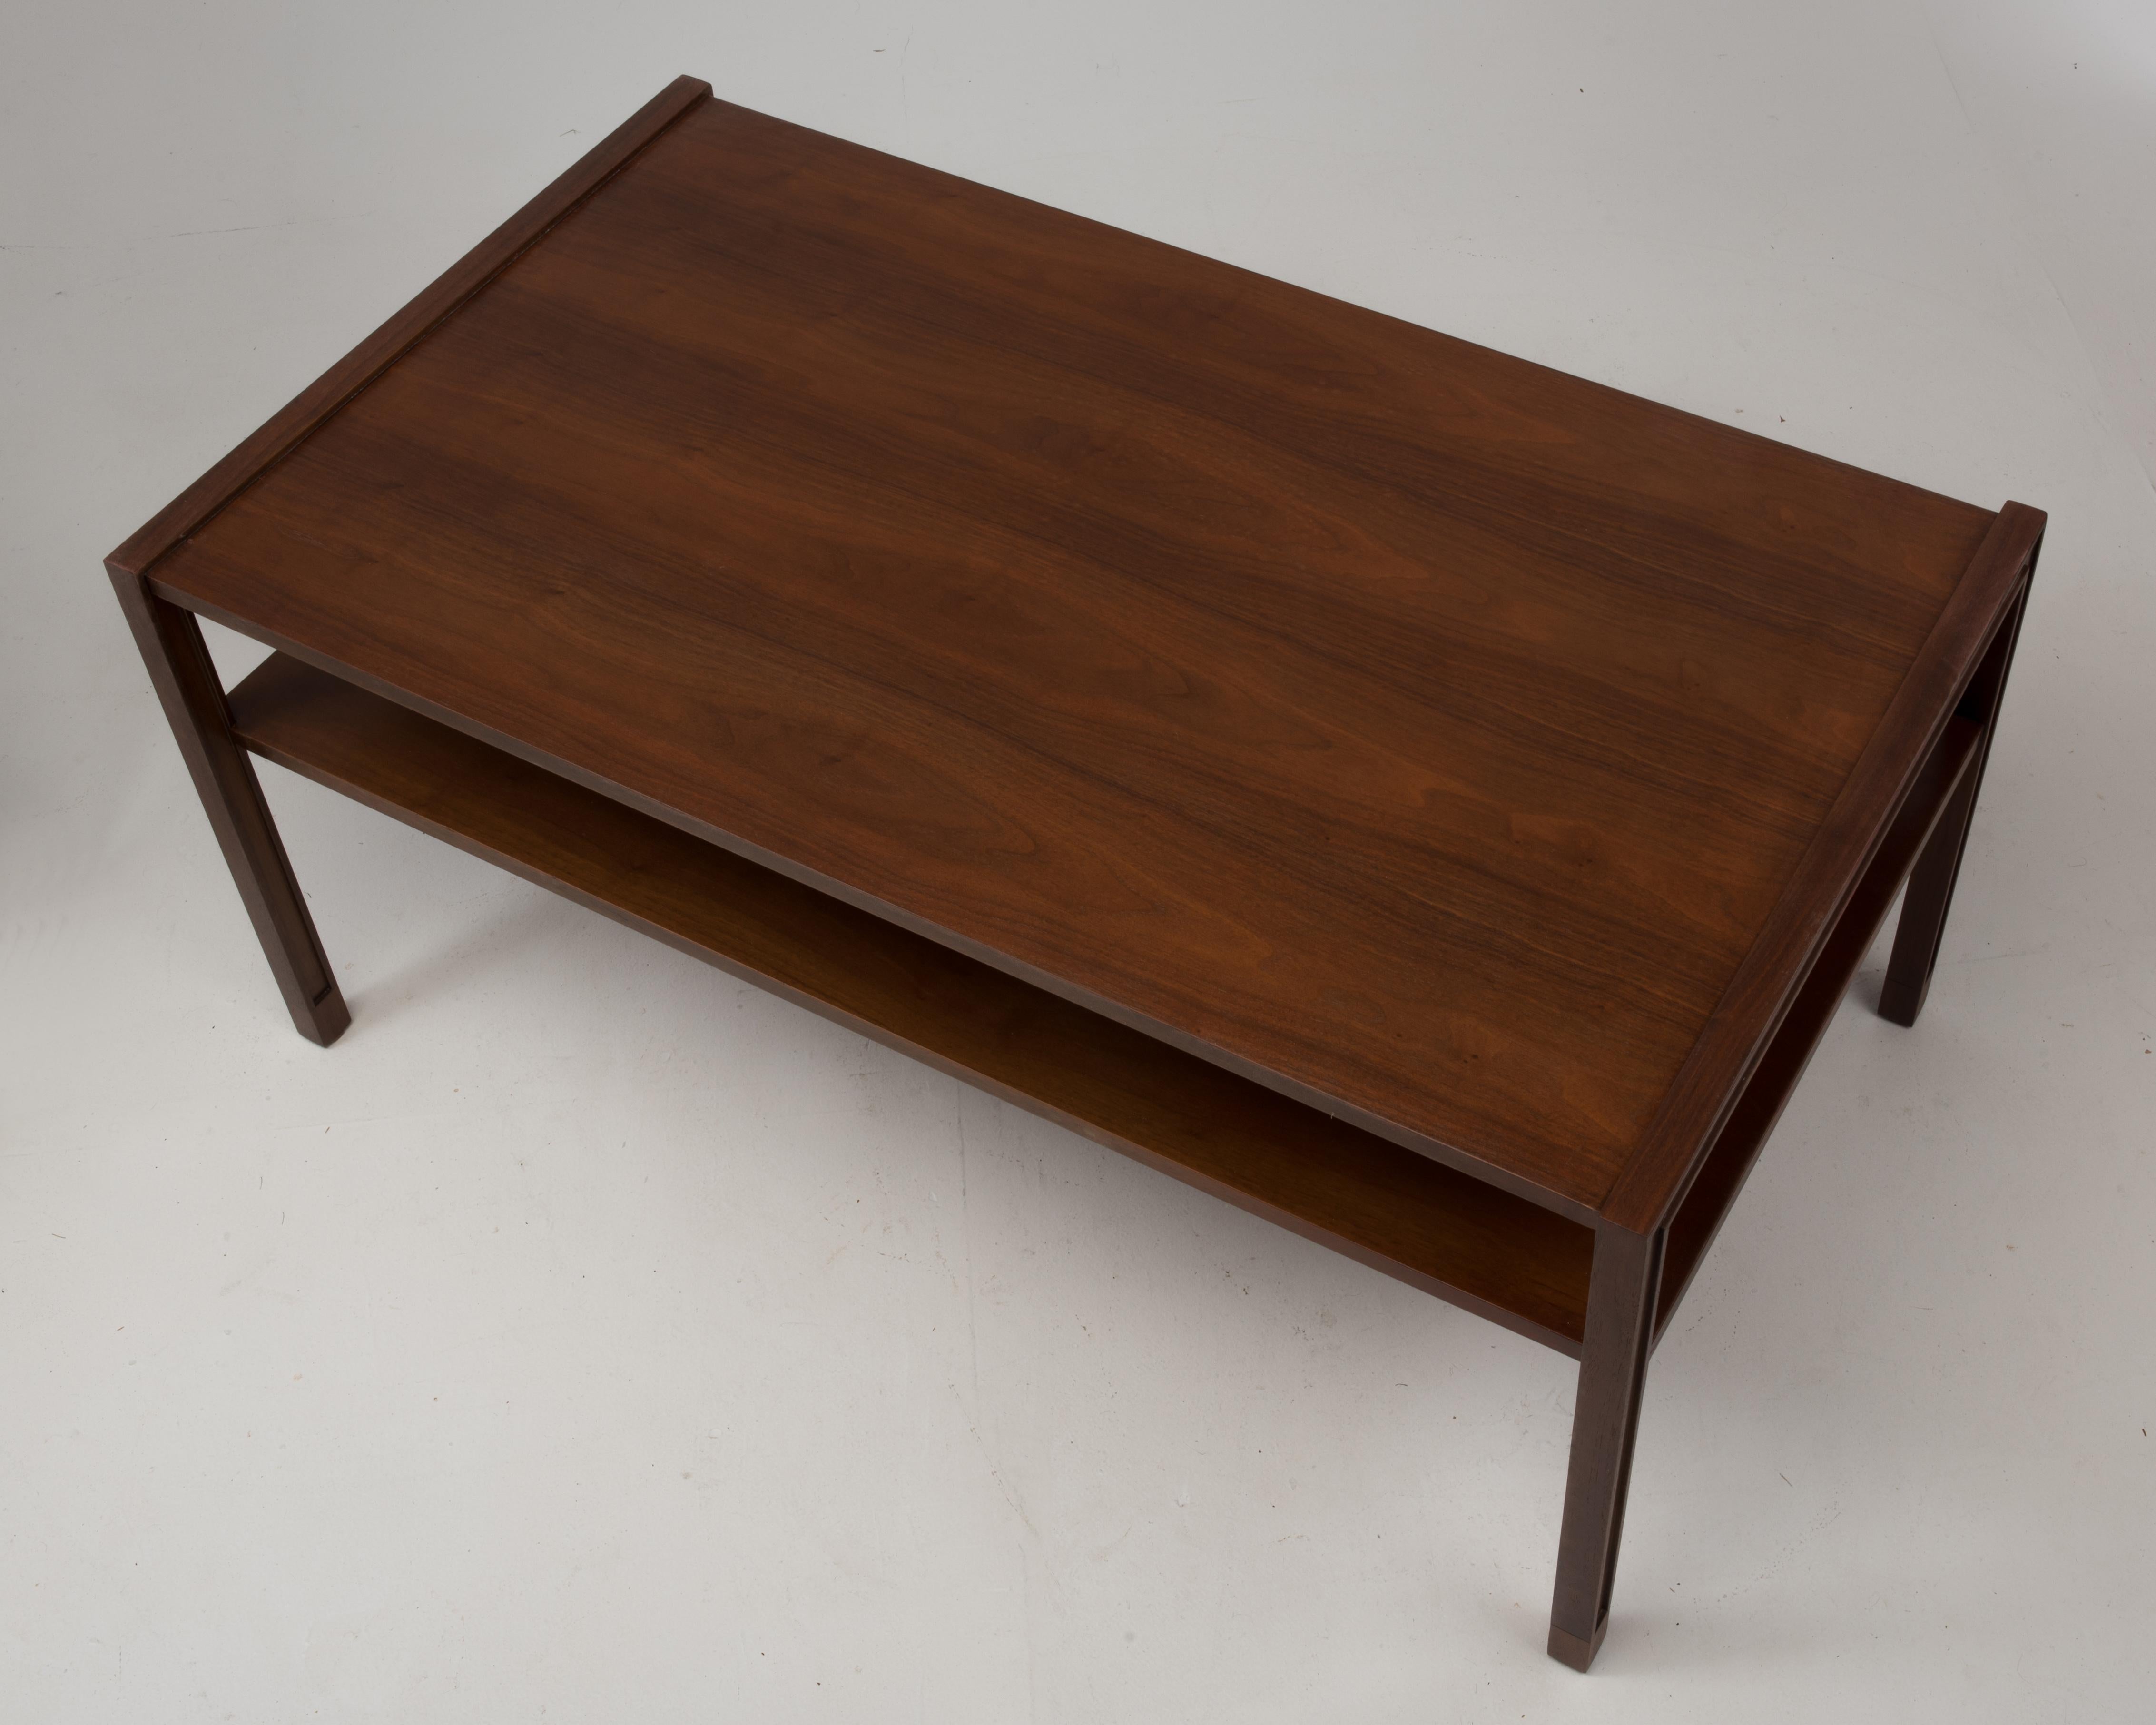 Coffee or cocktail table designed by Edward Wormley for Dunbar. The opening between the top and lower shelf is 6.1